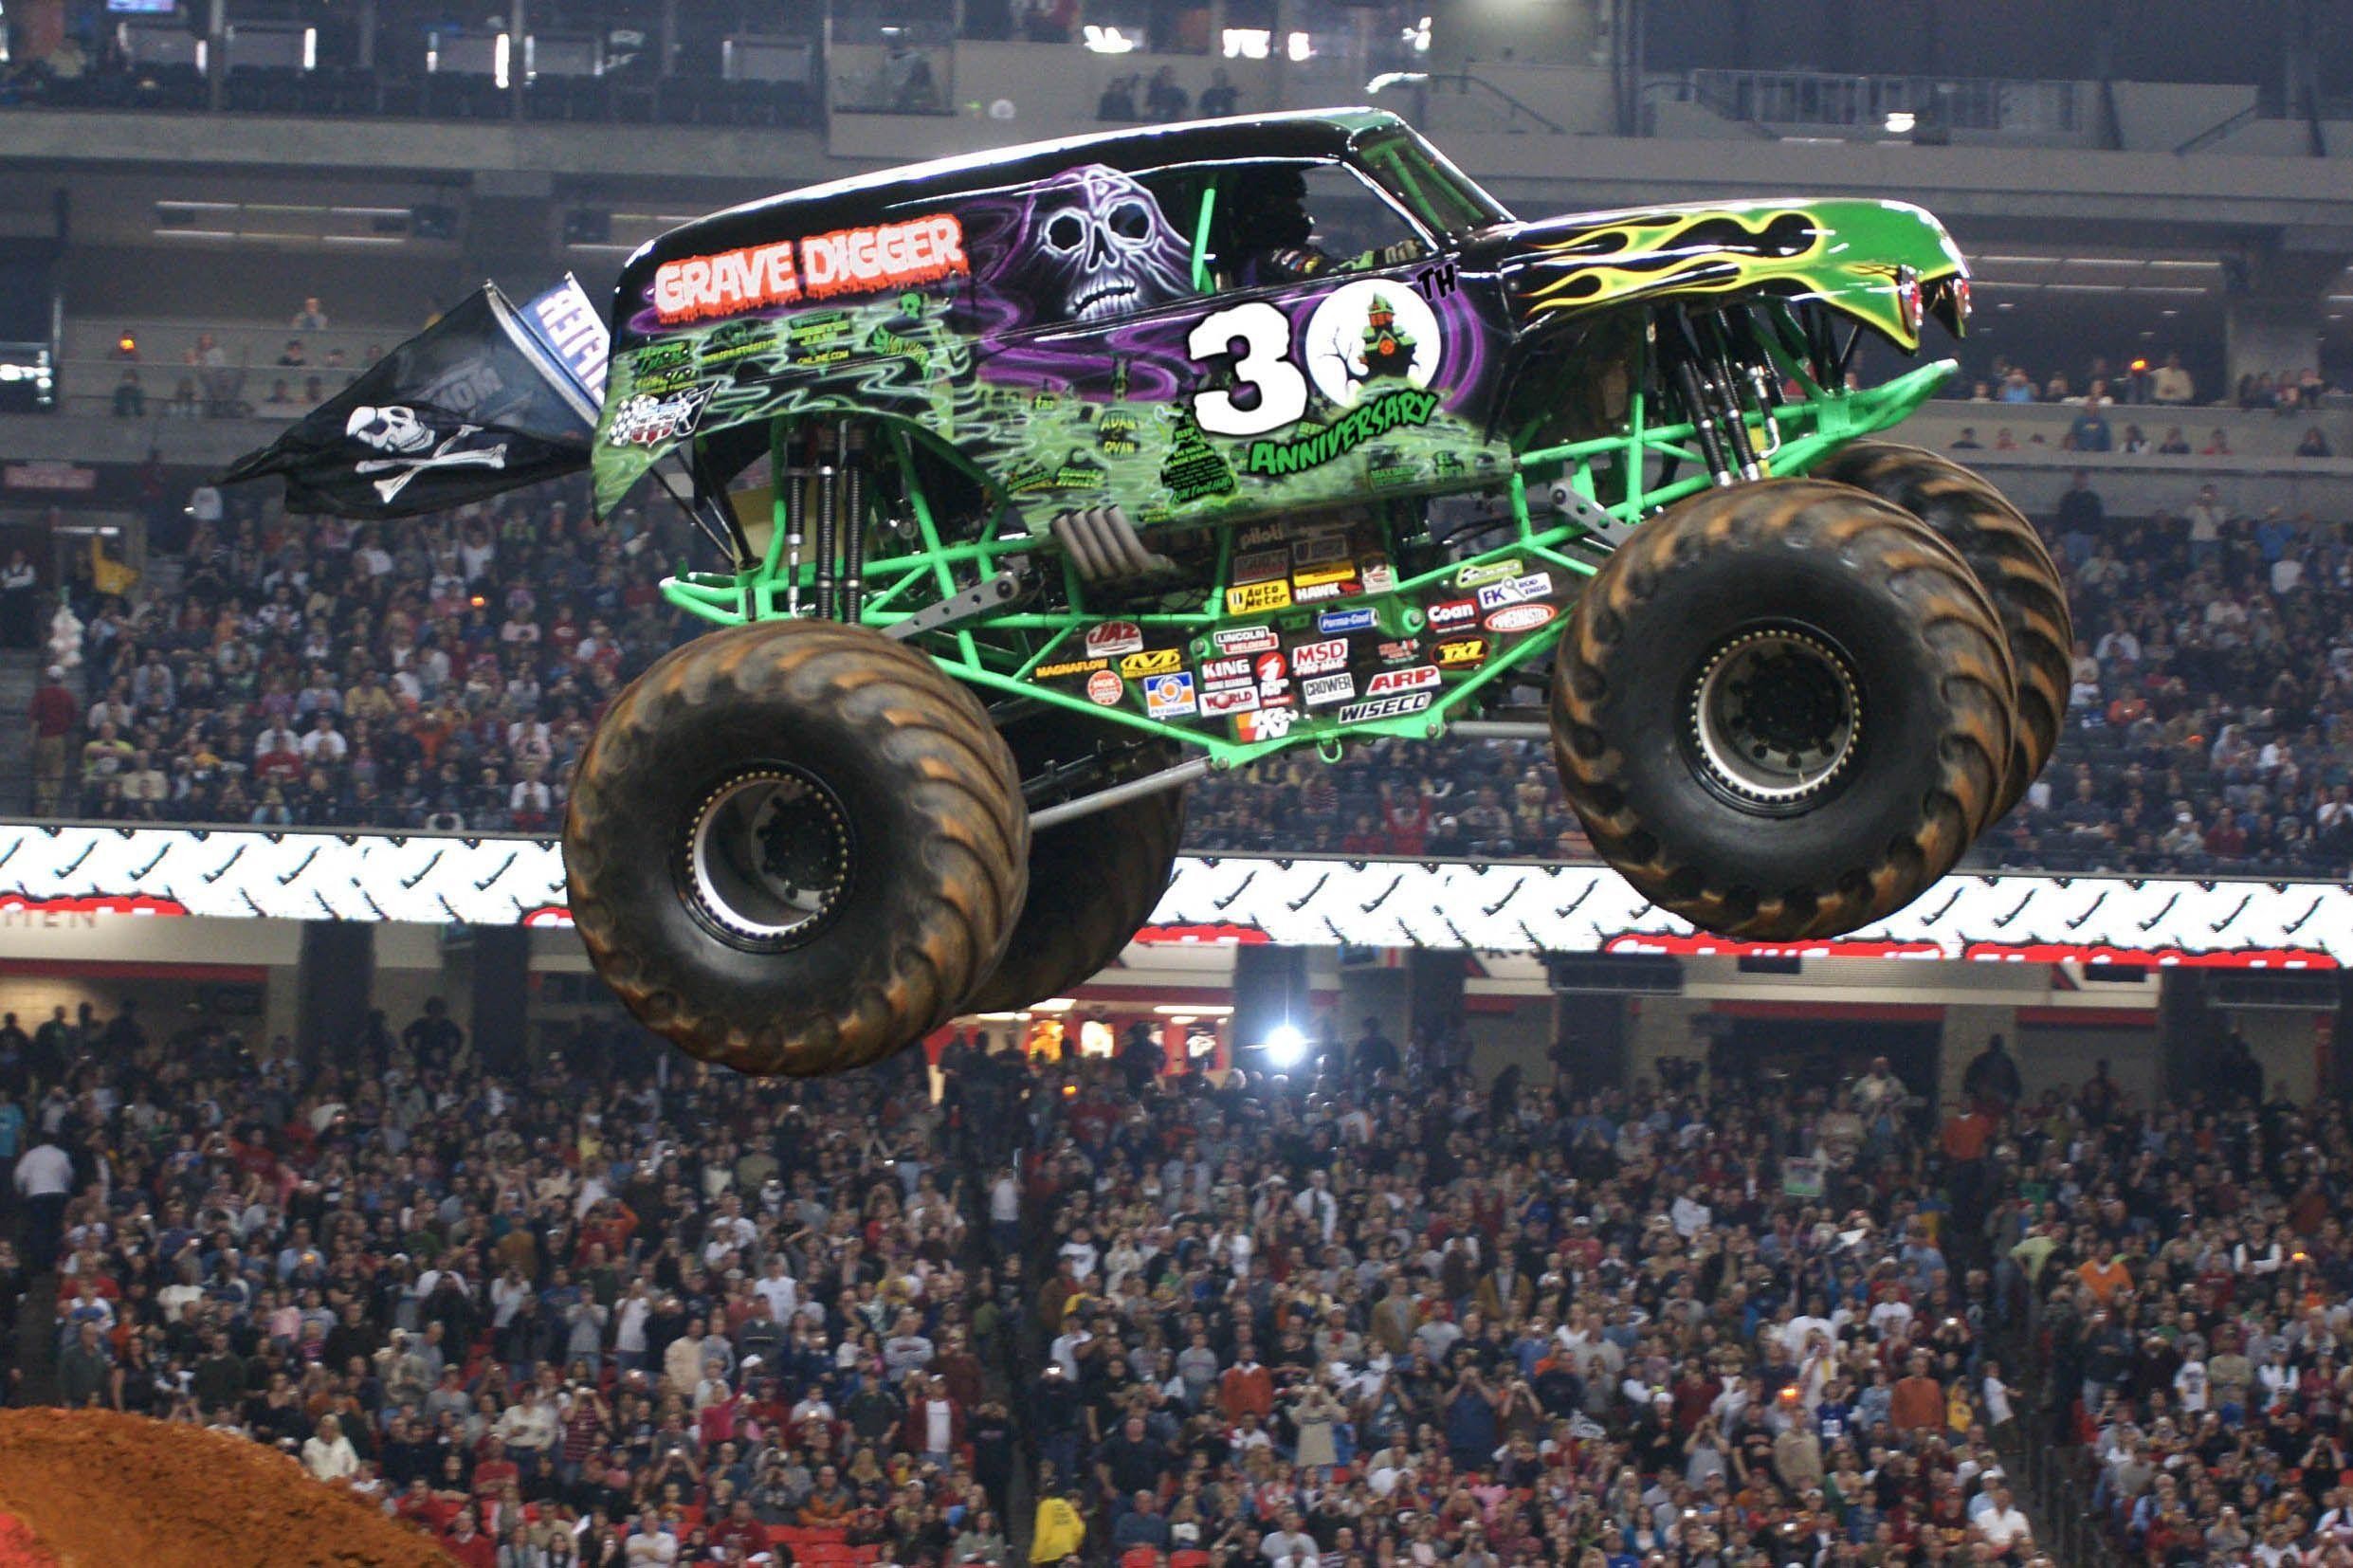 2482x1654 Grave Digger Monster Truck 4x4 Race Racing Wallpaper For Mobile .